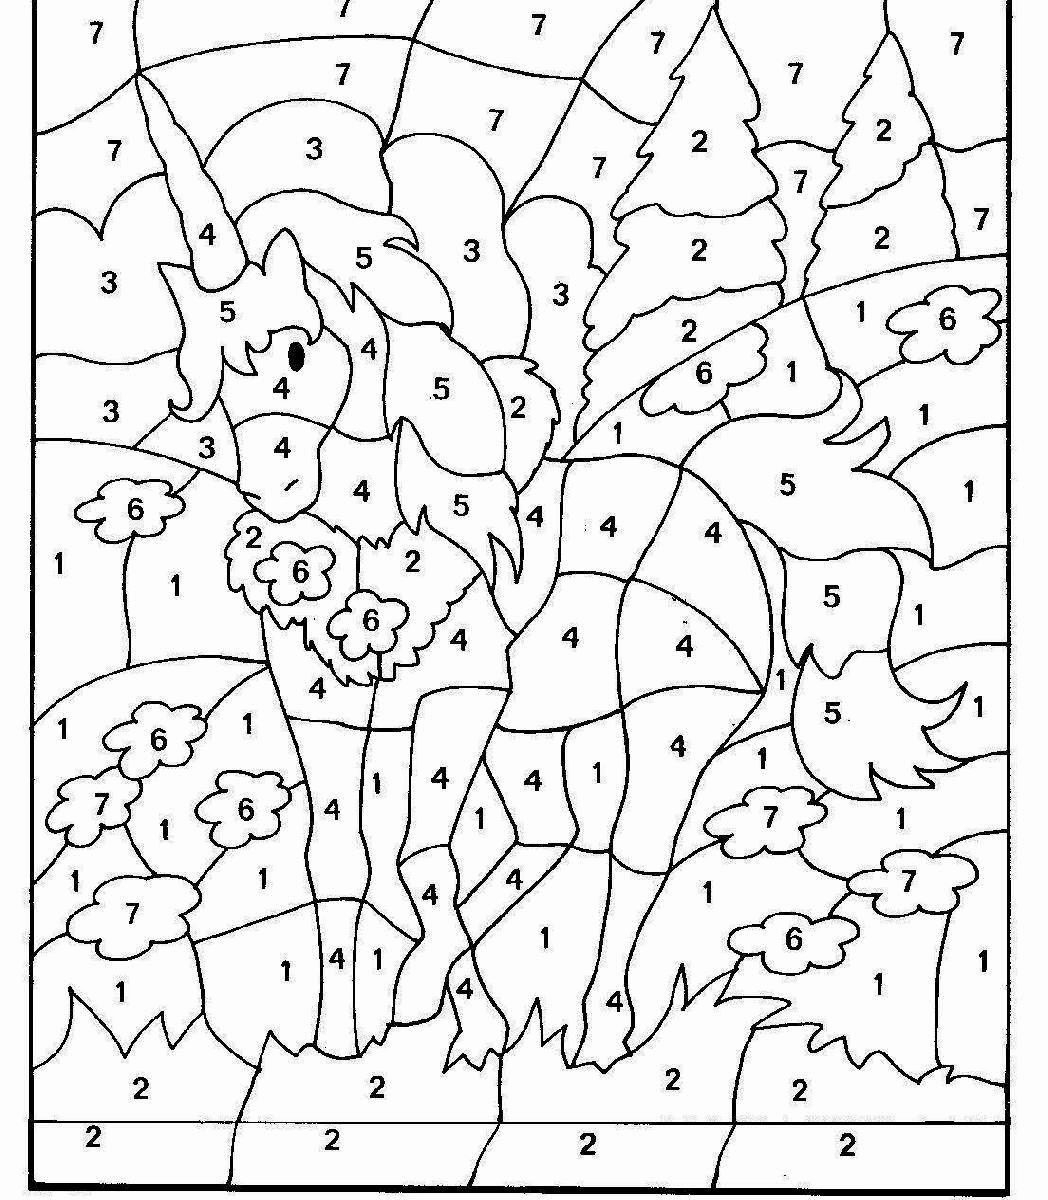 Coloring : Coloring Book Freeplication Worksheets Pages